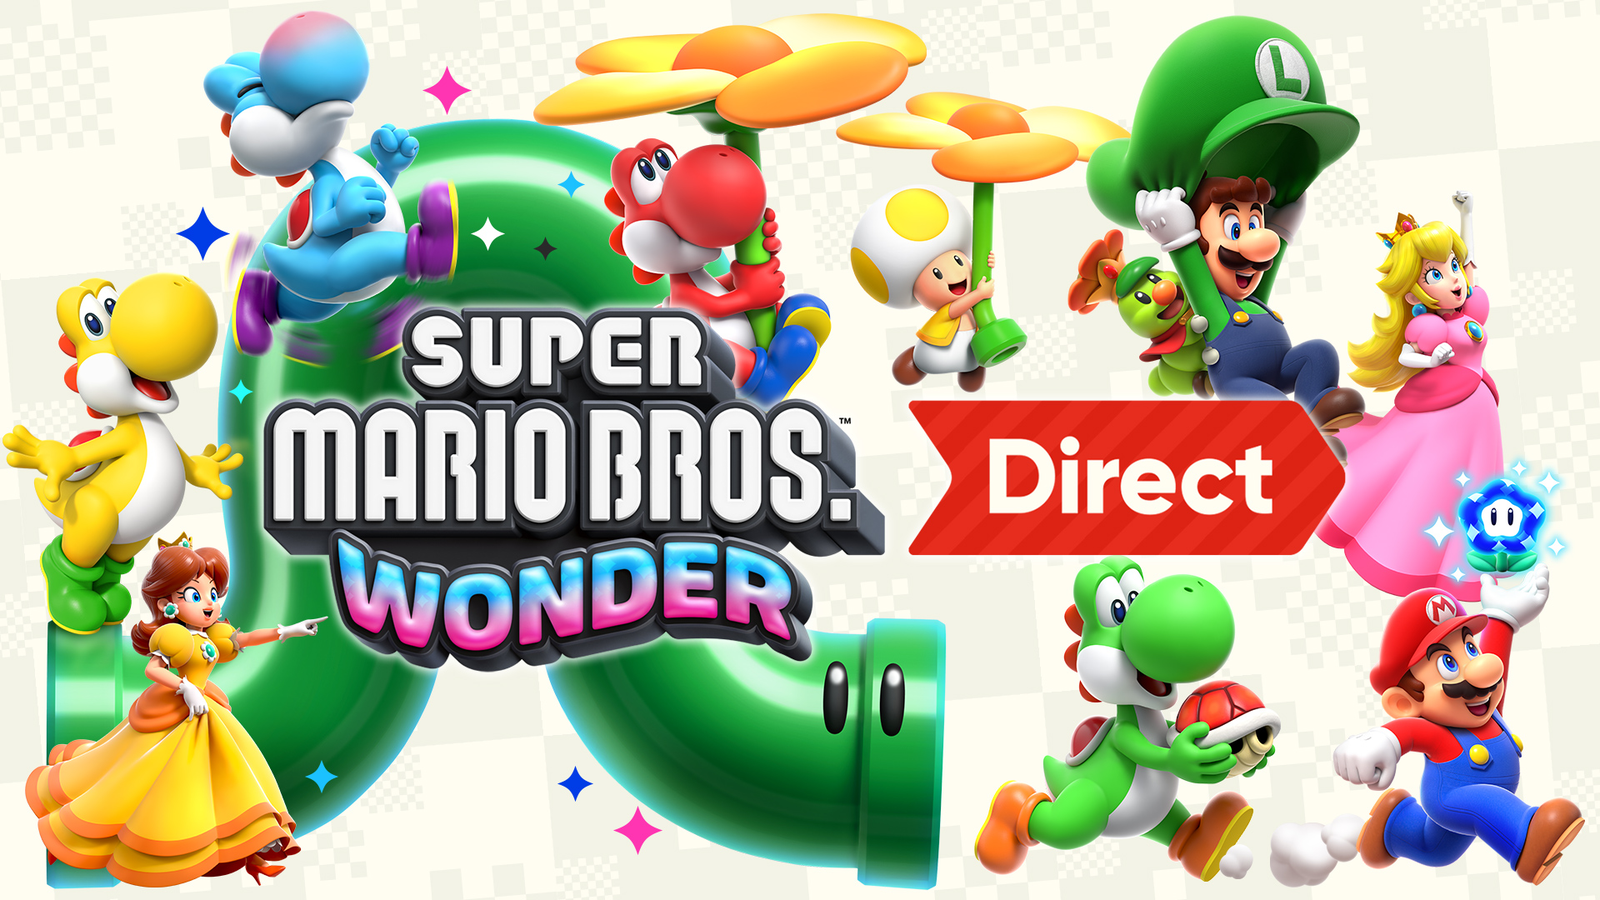 New Nintendo Direct Reportedly Happening This Week